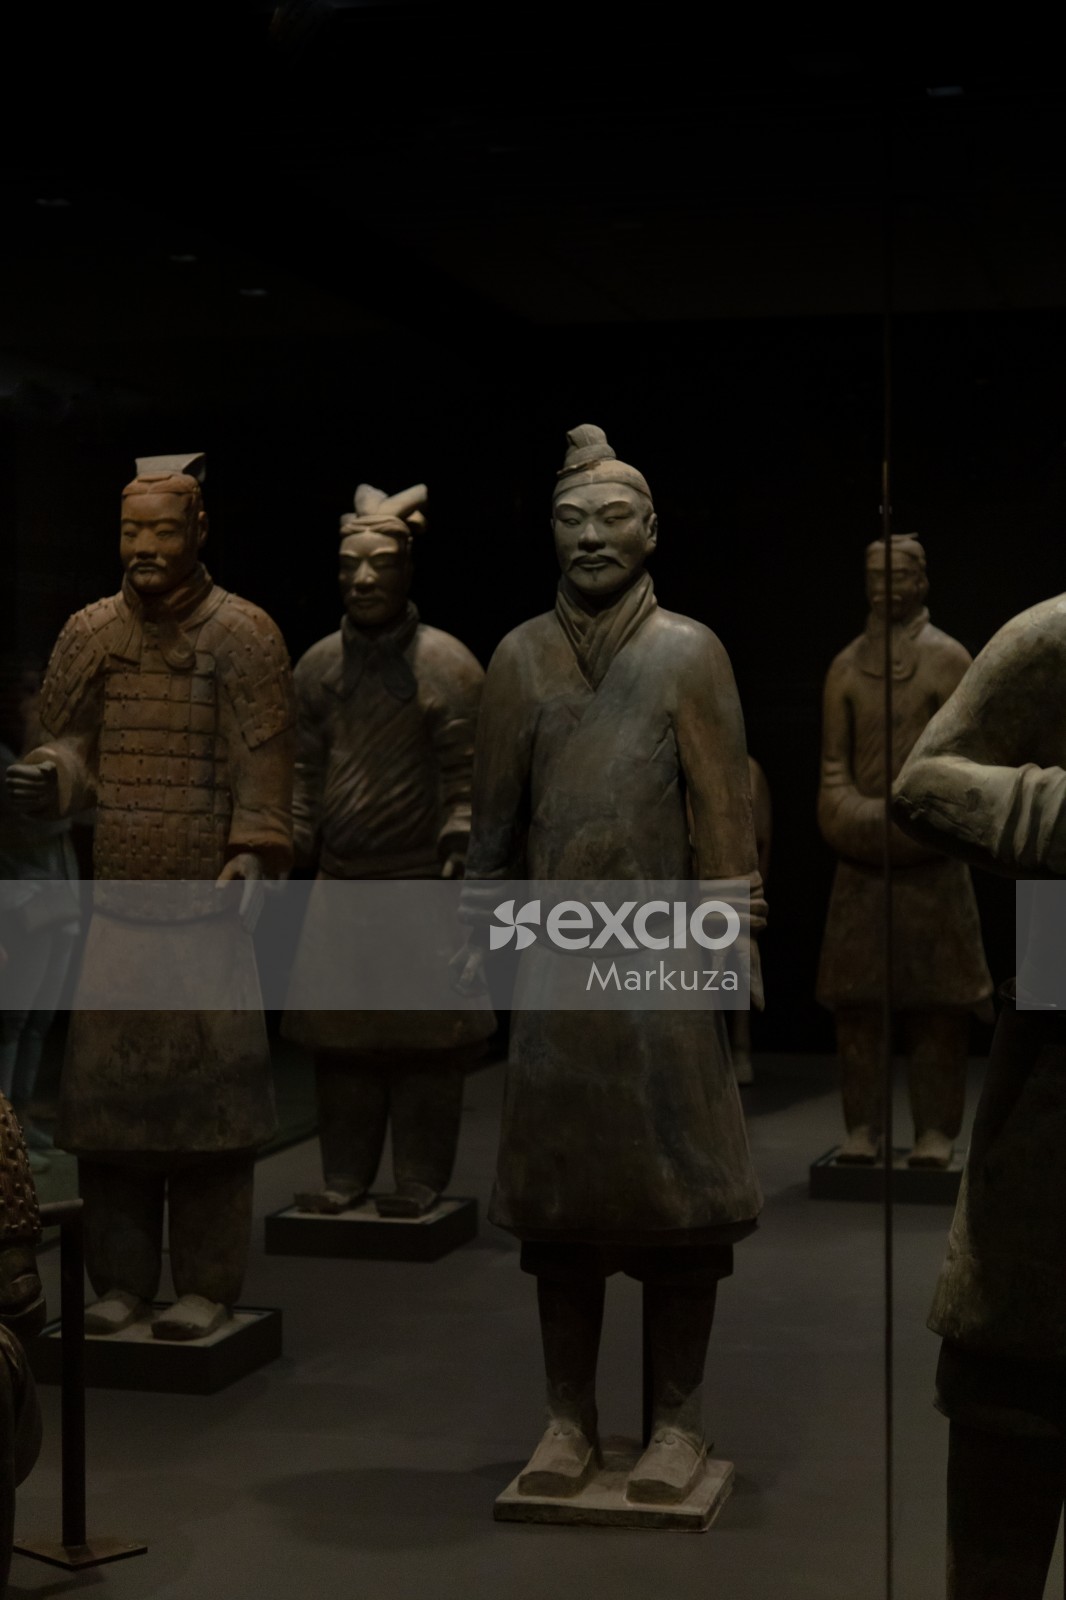 The Terracotta Army unarmed